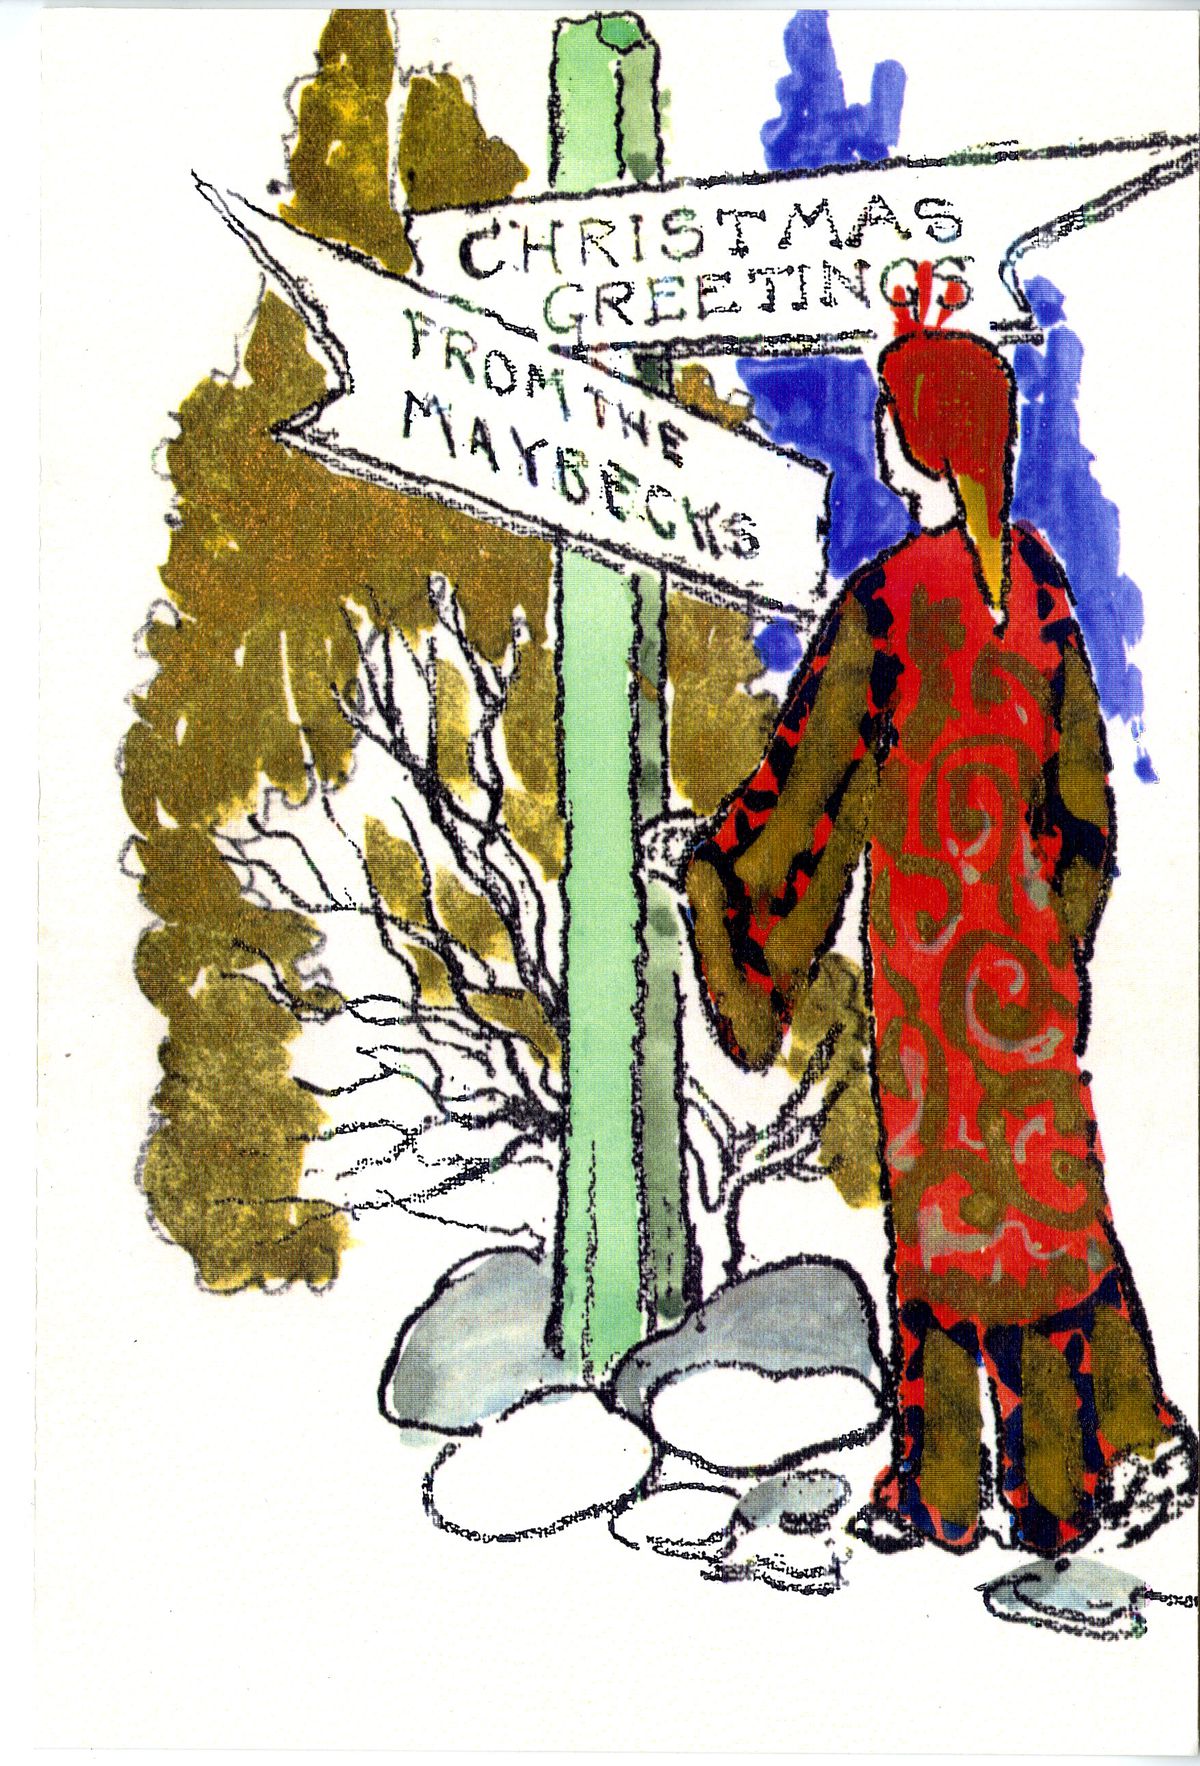 A Christmas card drawn by Bernard Maybeck shows an elaborately robed figure standing at a crossroads.